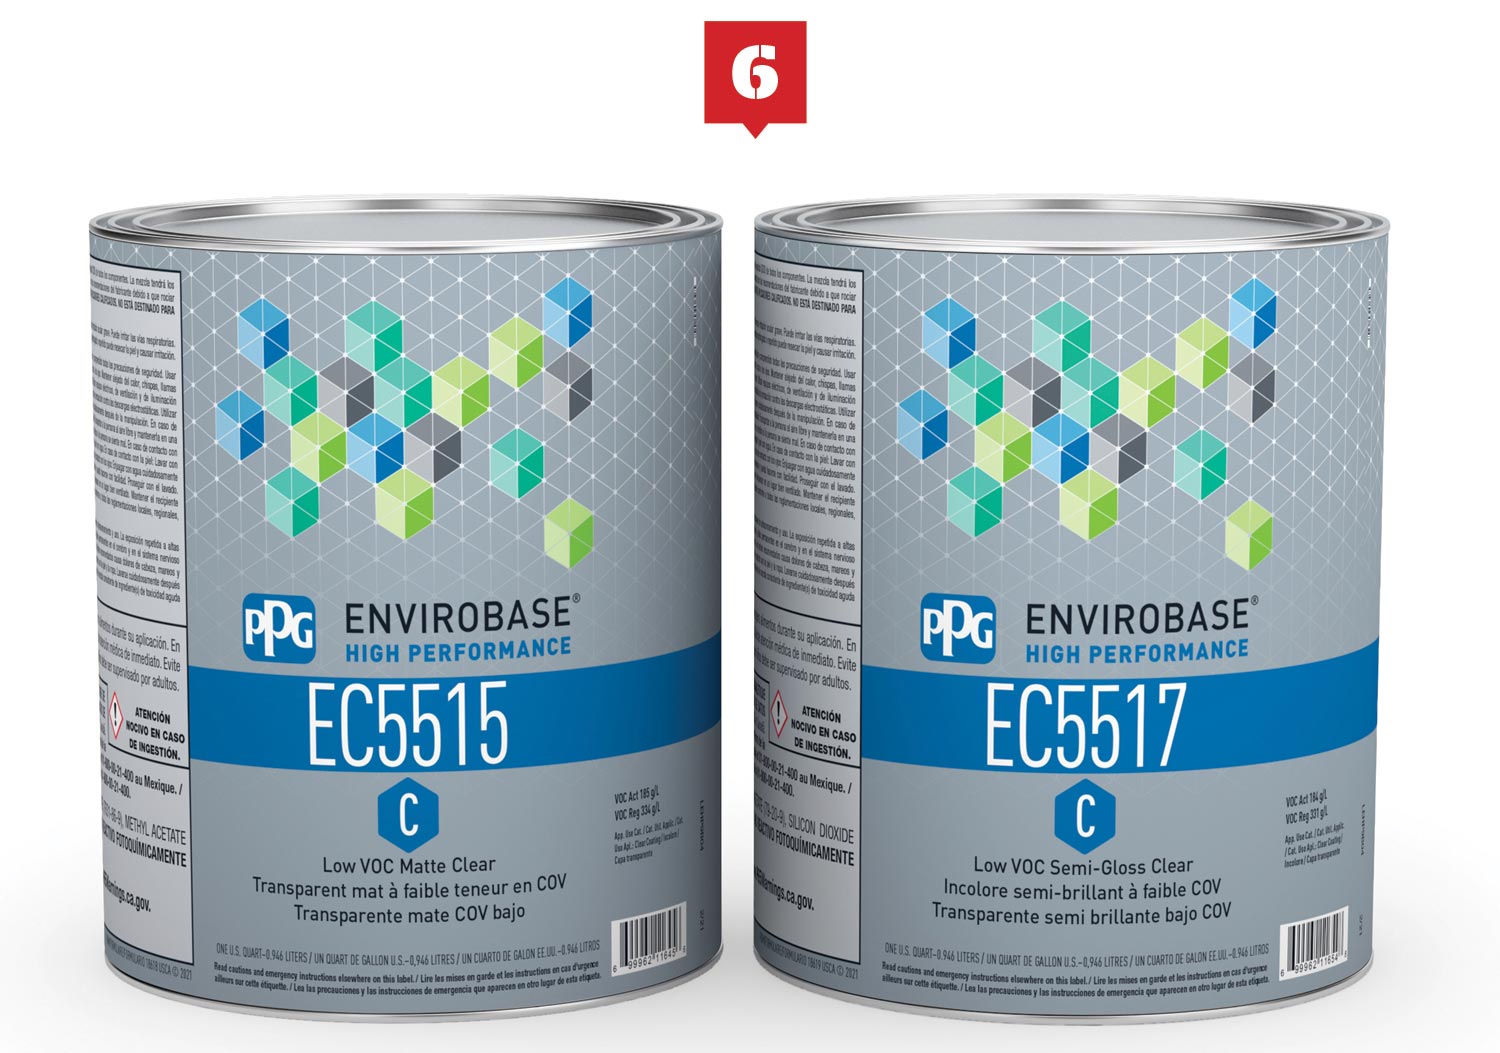 PPG 2.1 Low VOC Matte and Semi-Gloss Clearcoats